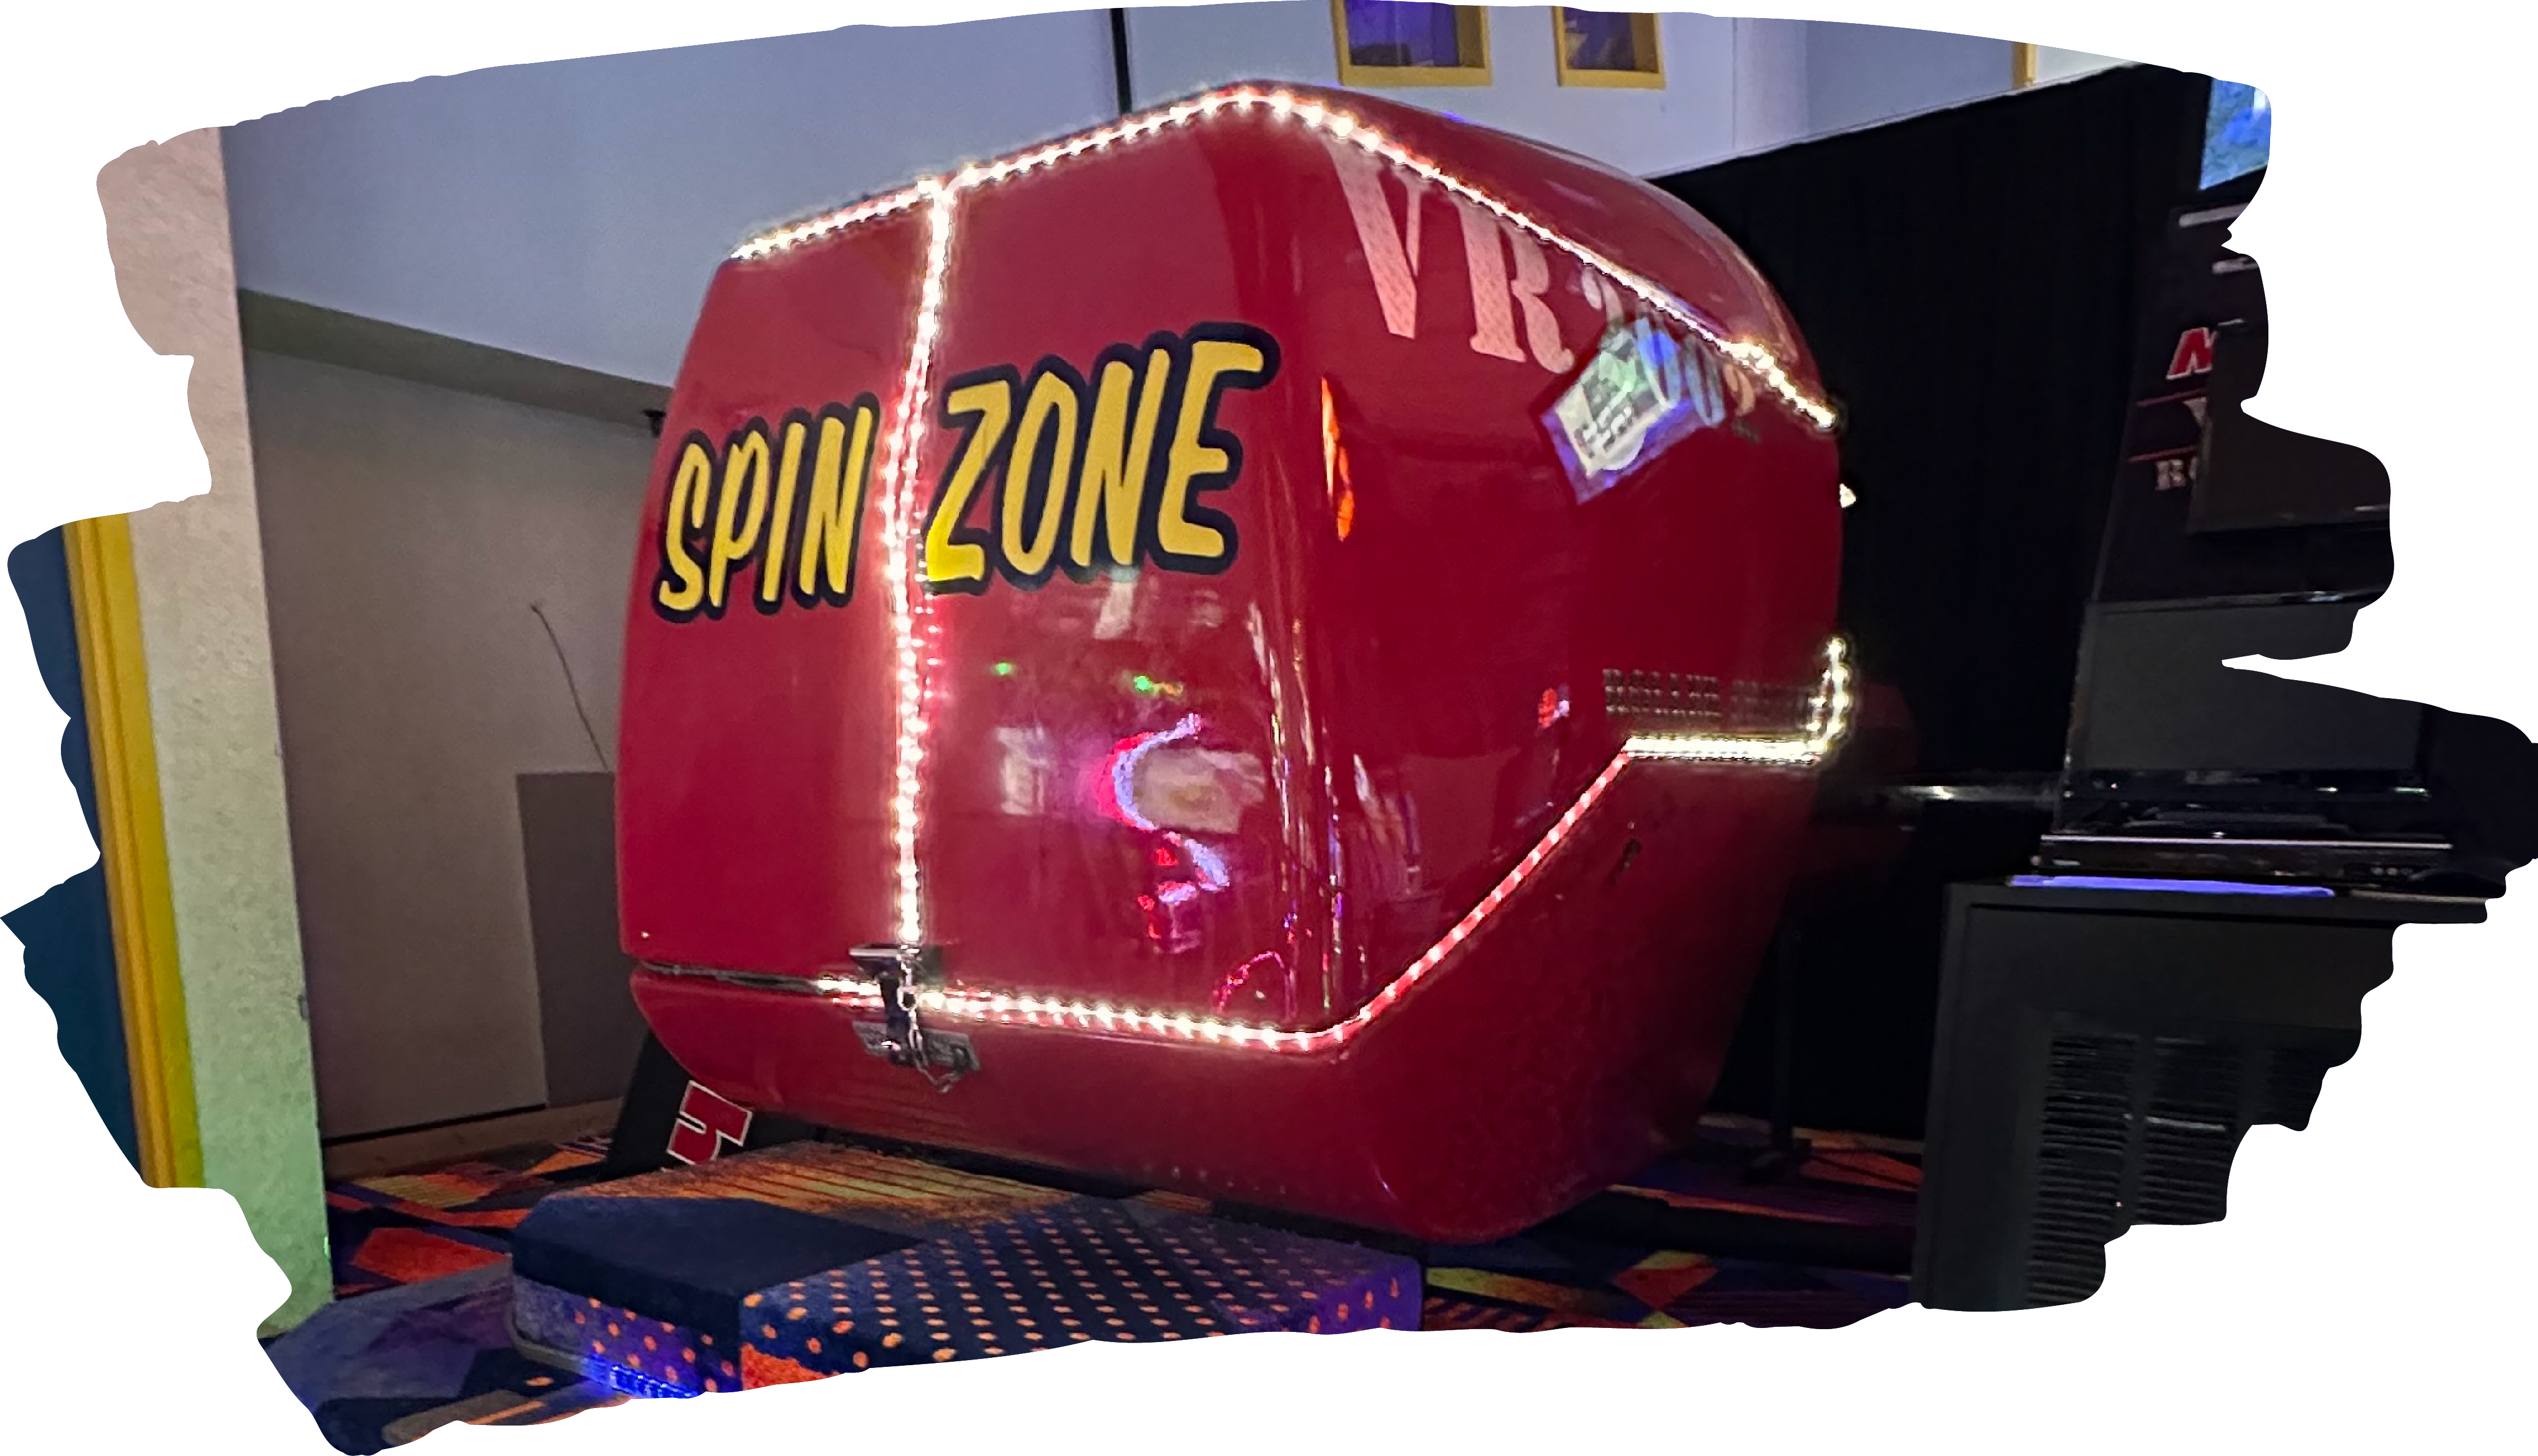 Spin Zone ball